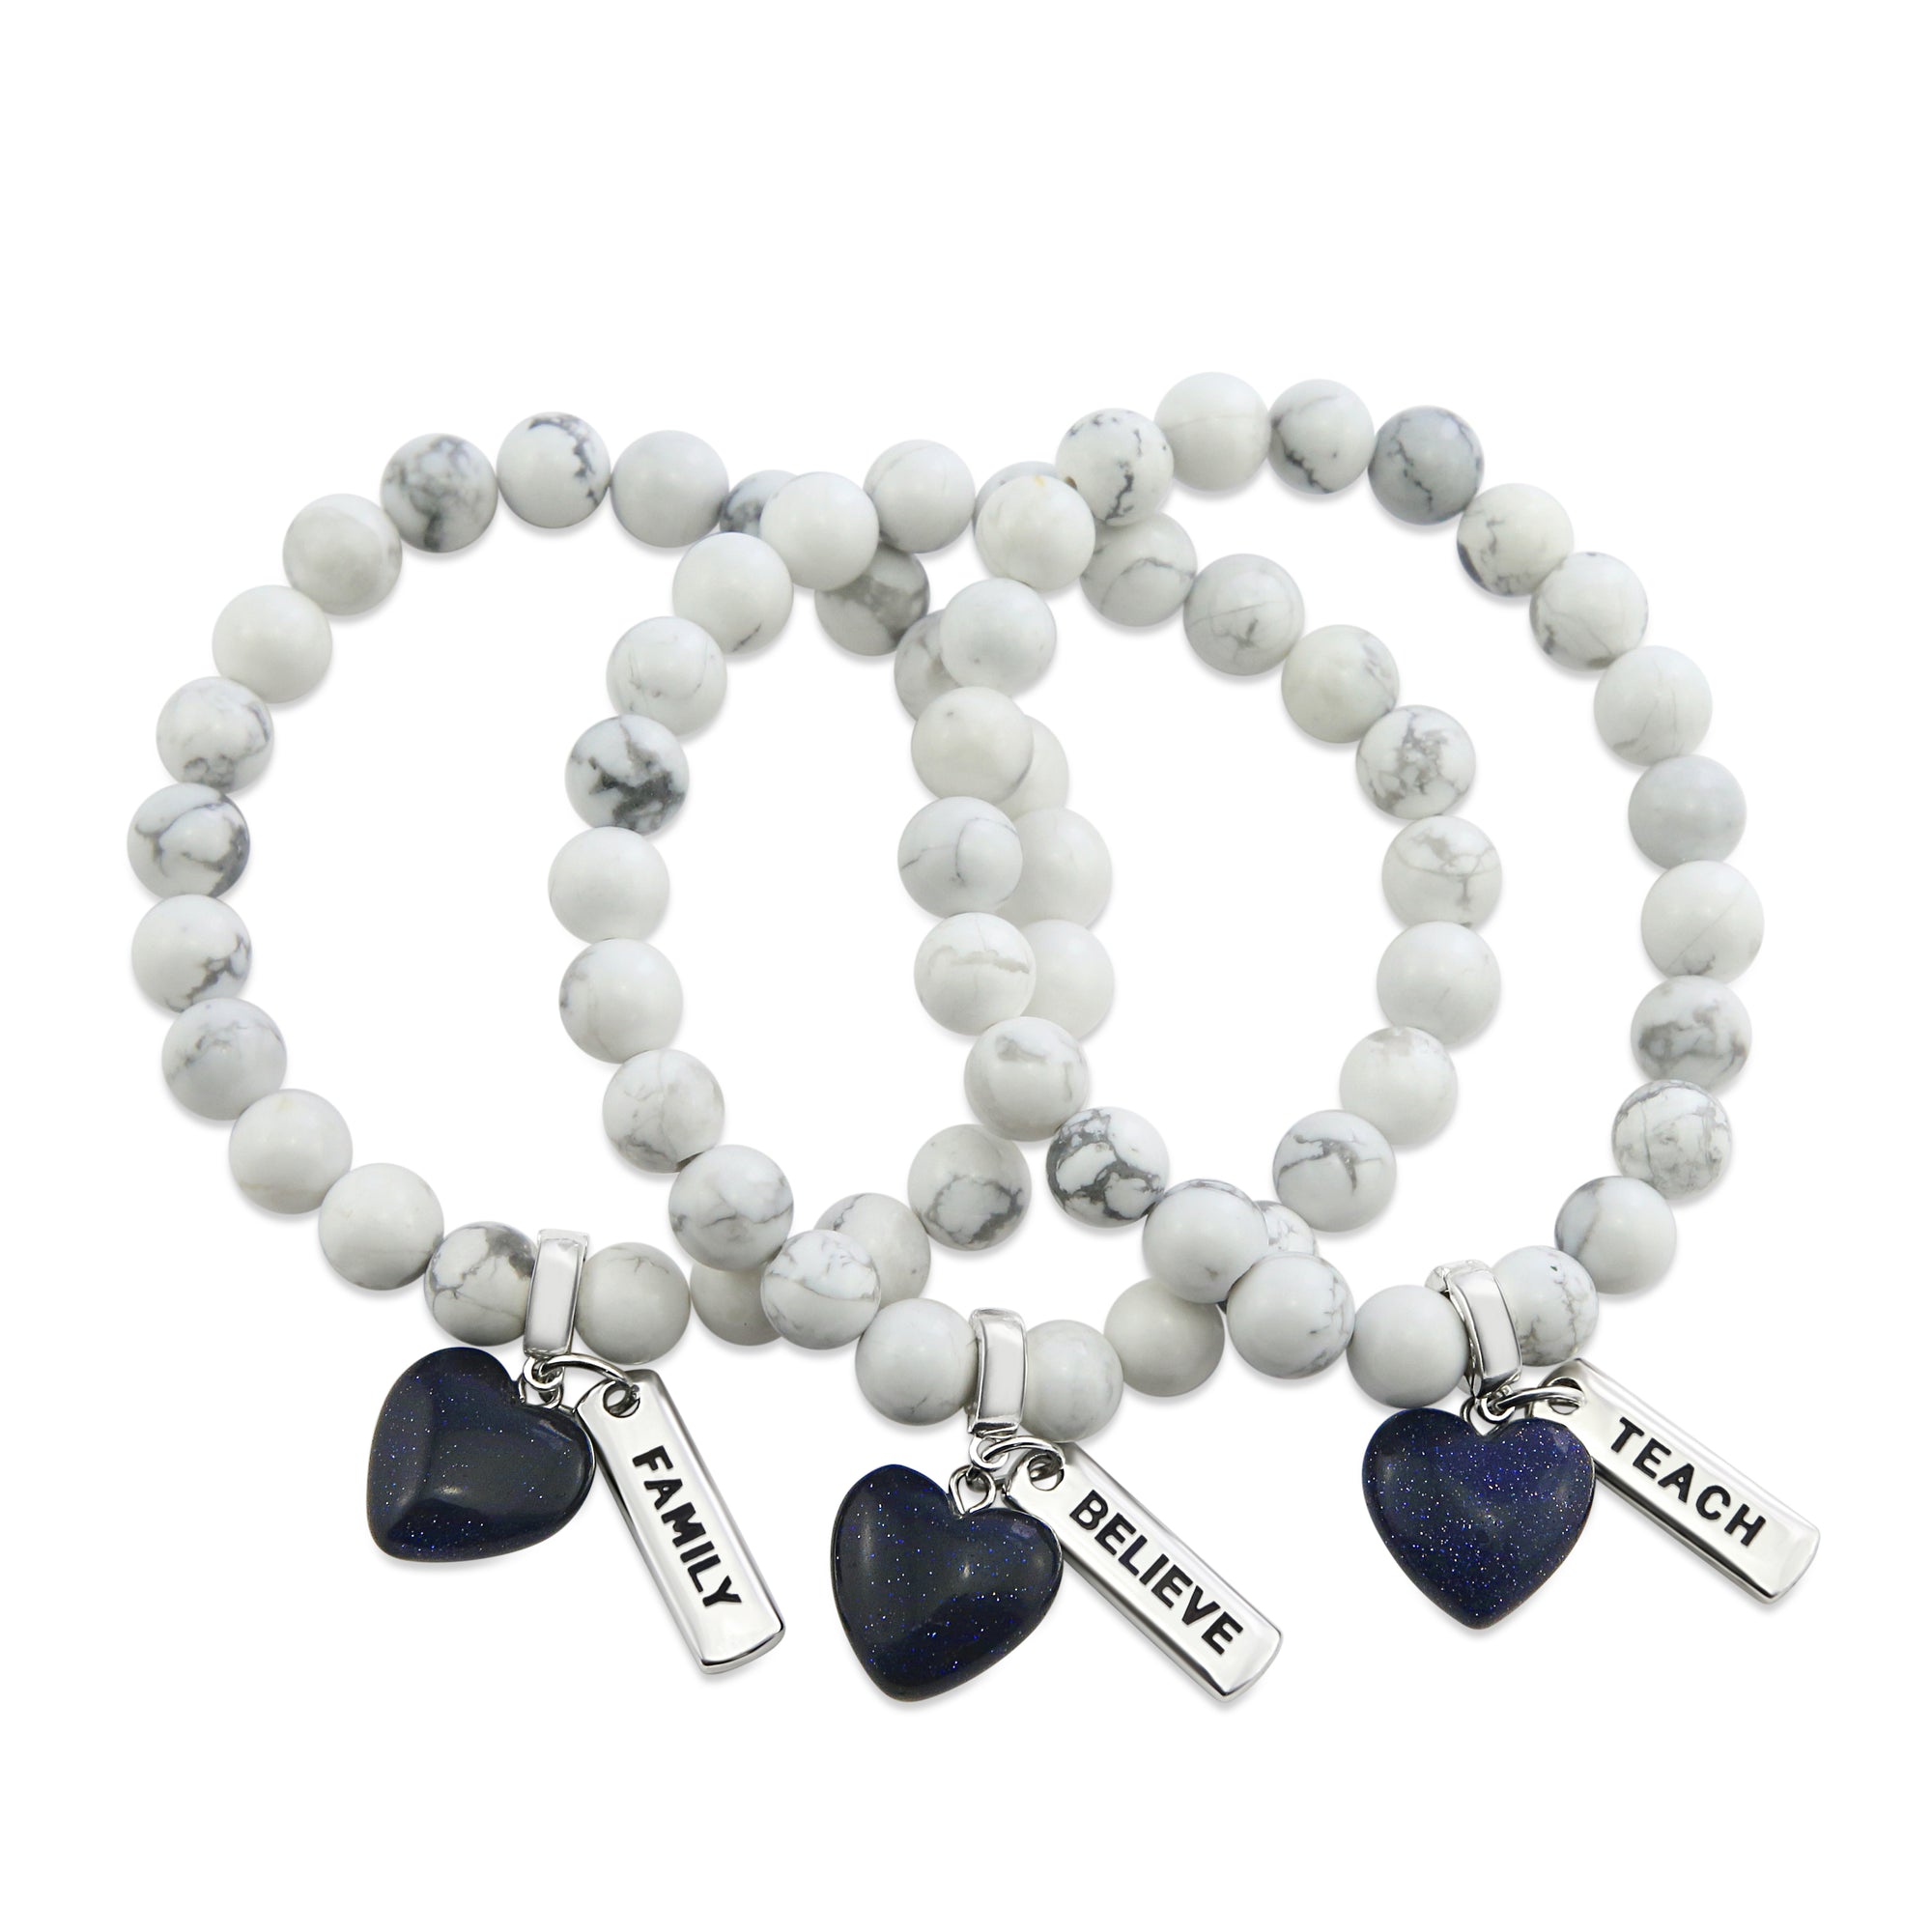 White marble howlite stone bead bracelets with stone heart charm in midnight blue and meaningful word charms. 